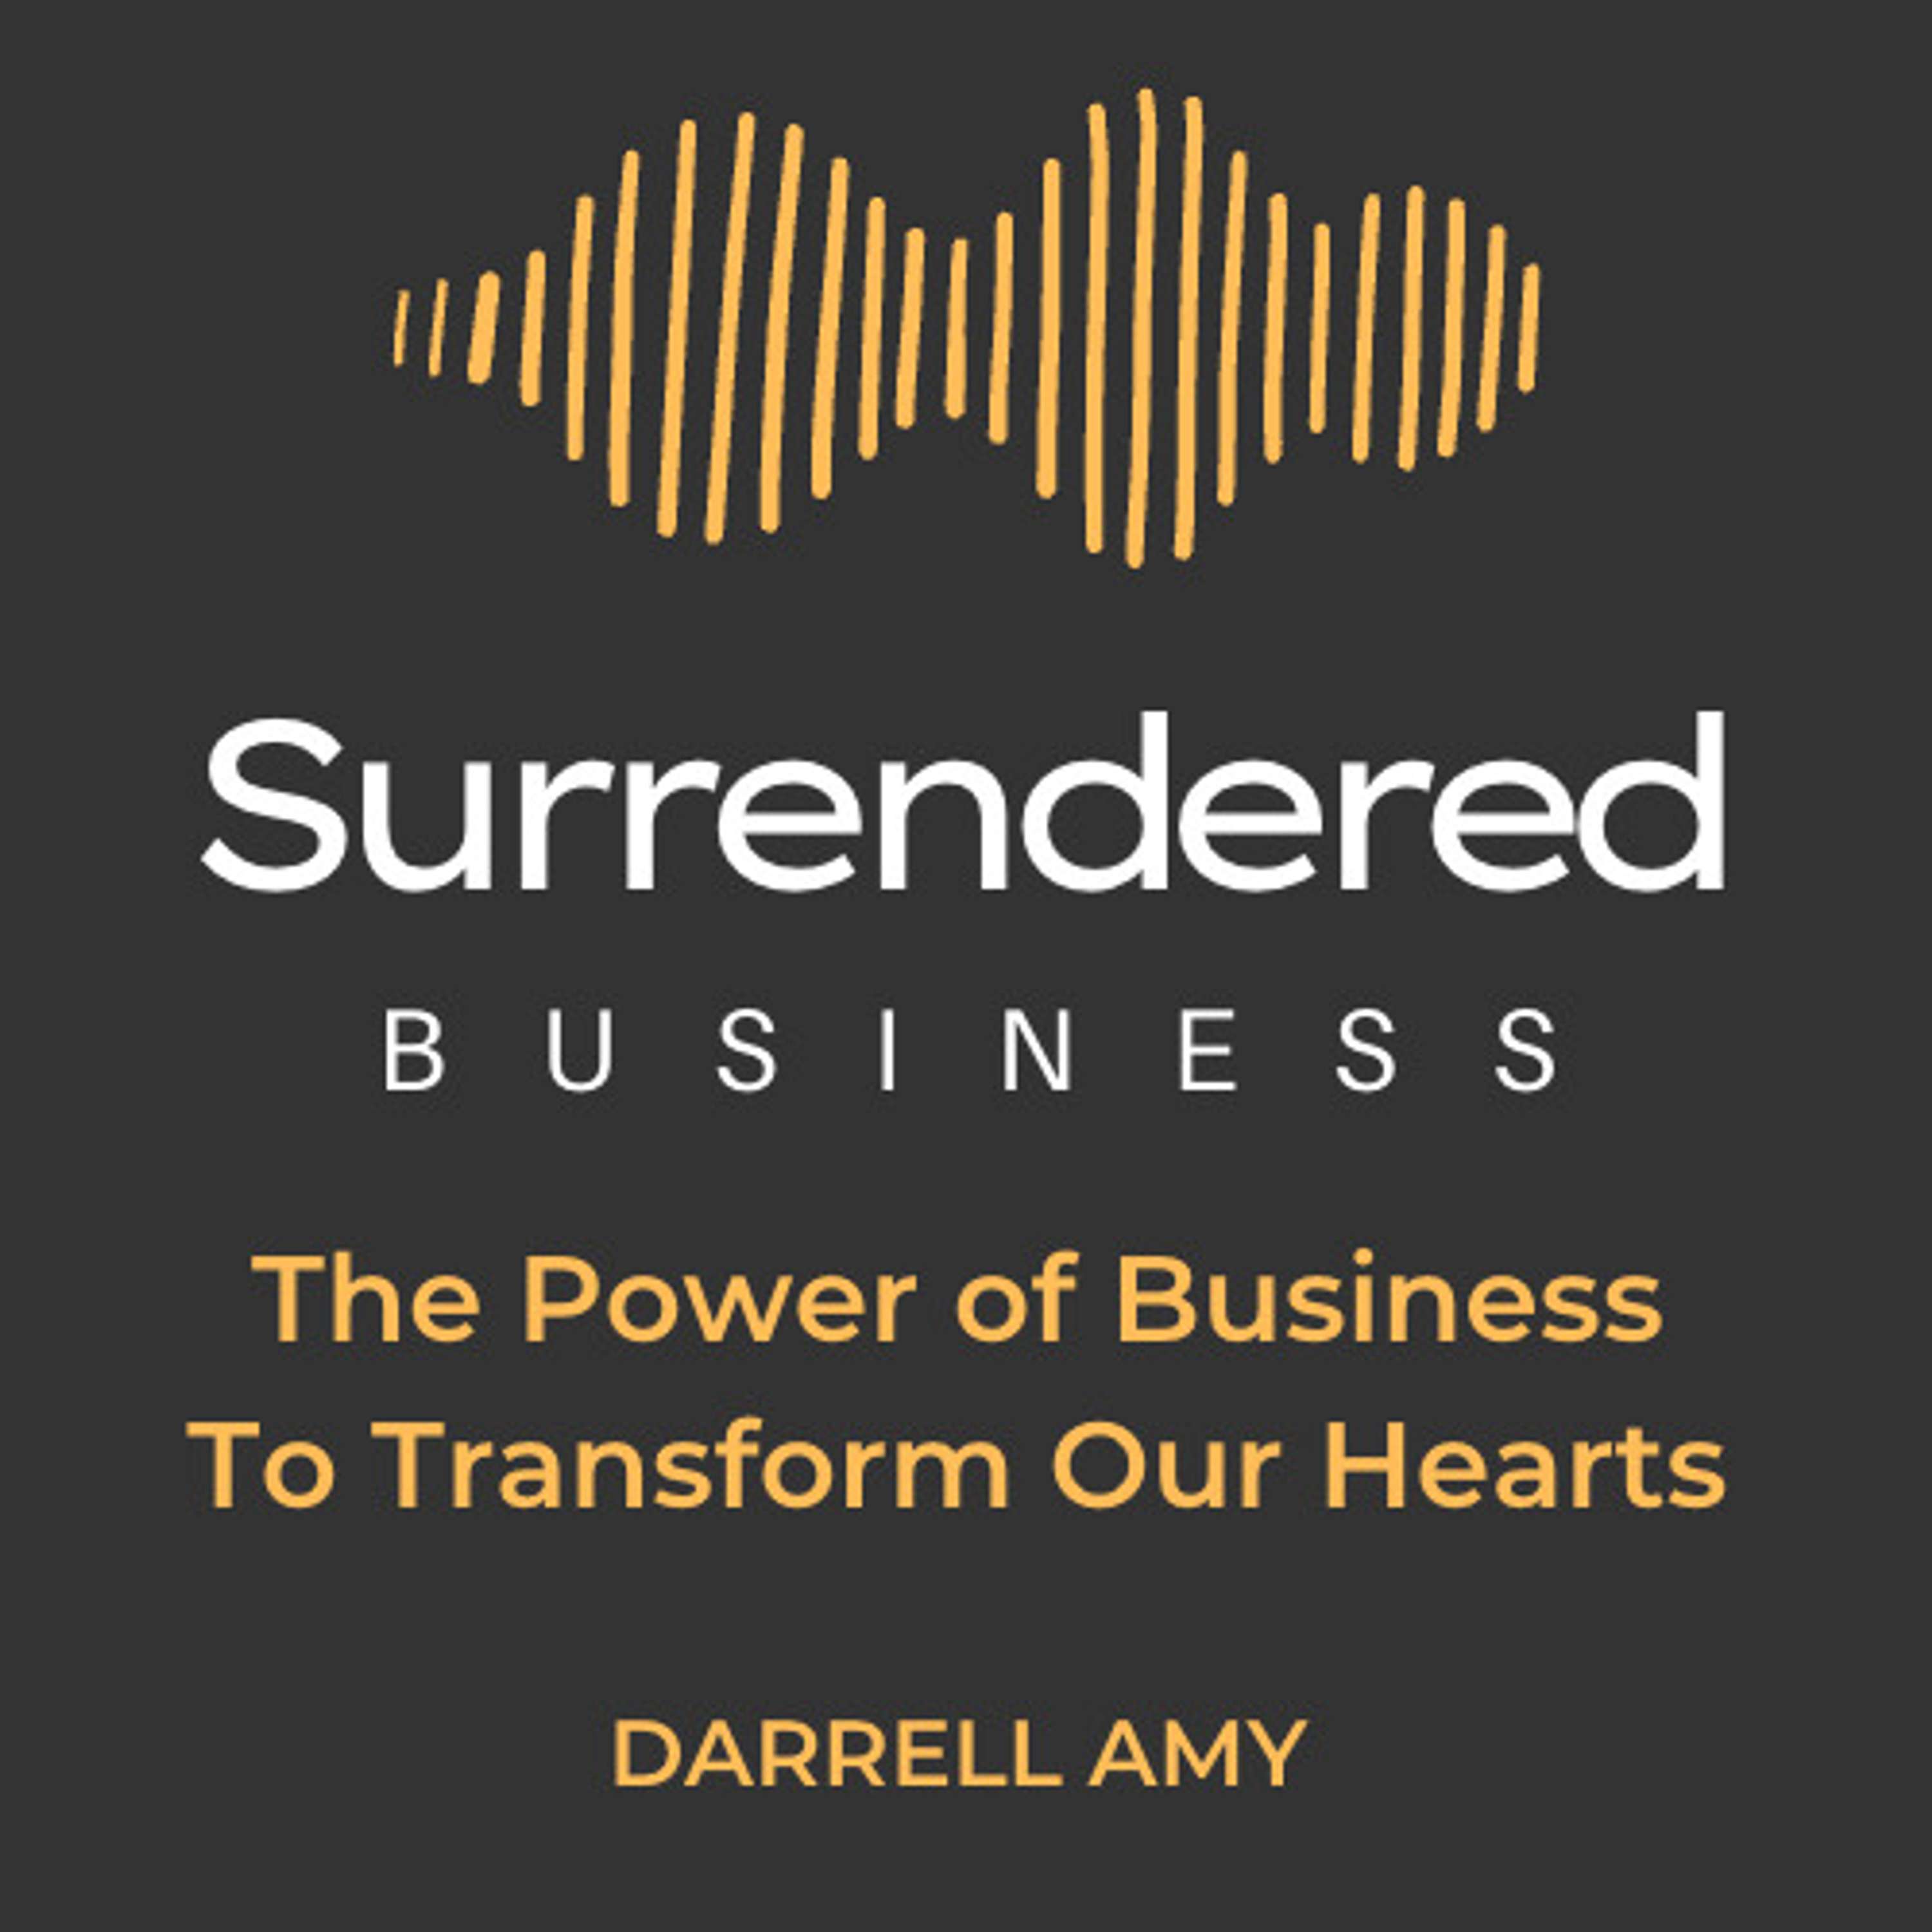 The Power of Business To Transform Our Hearts